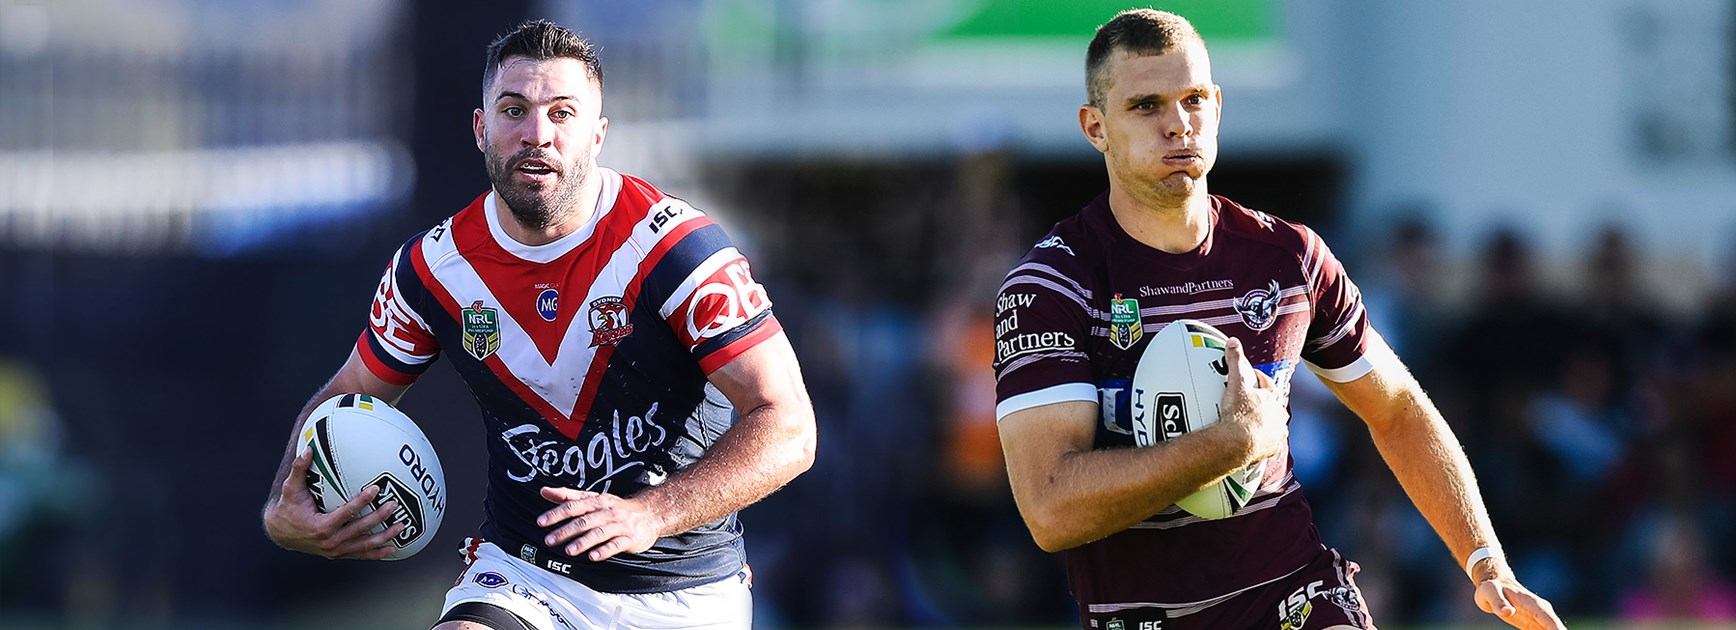 Match Preview | Sea Eagles v Roosters